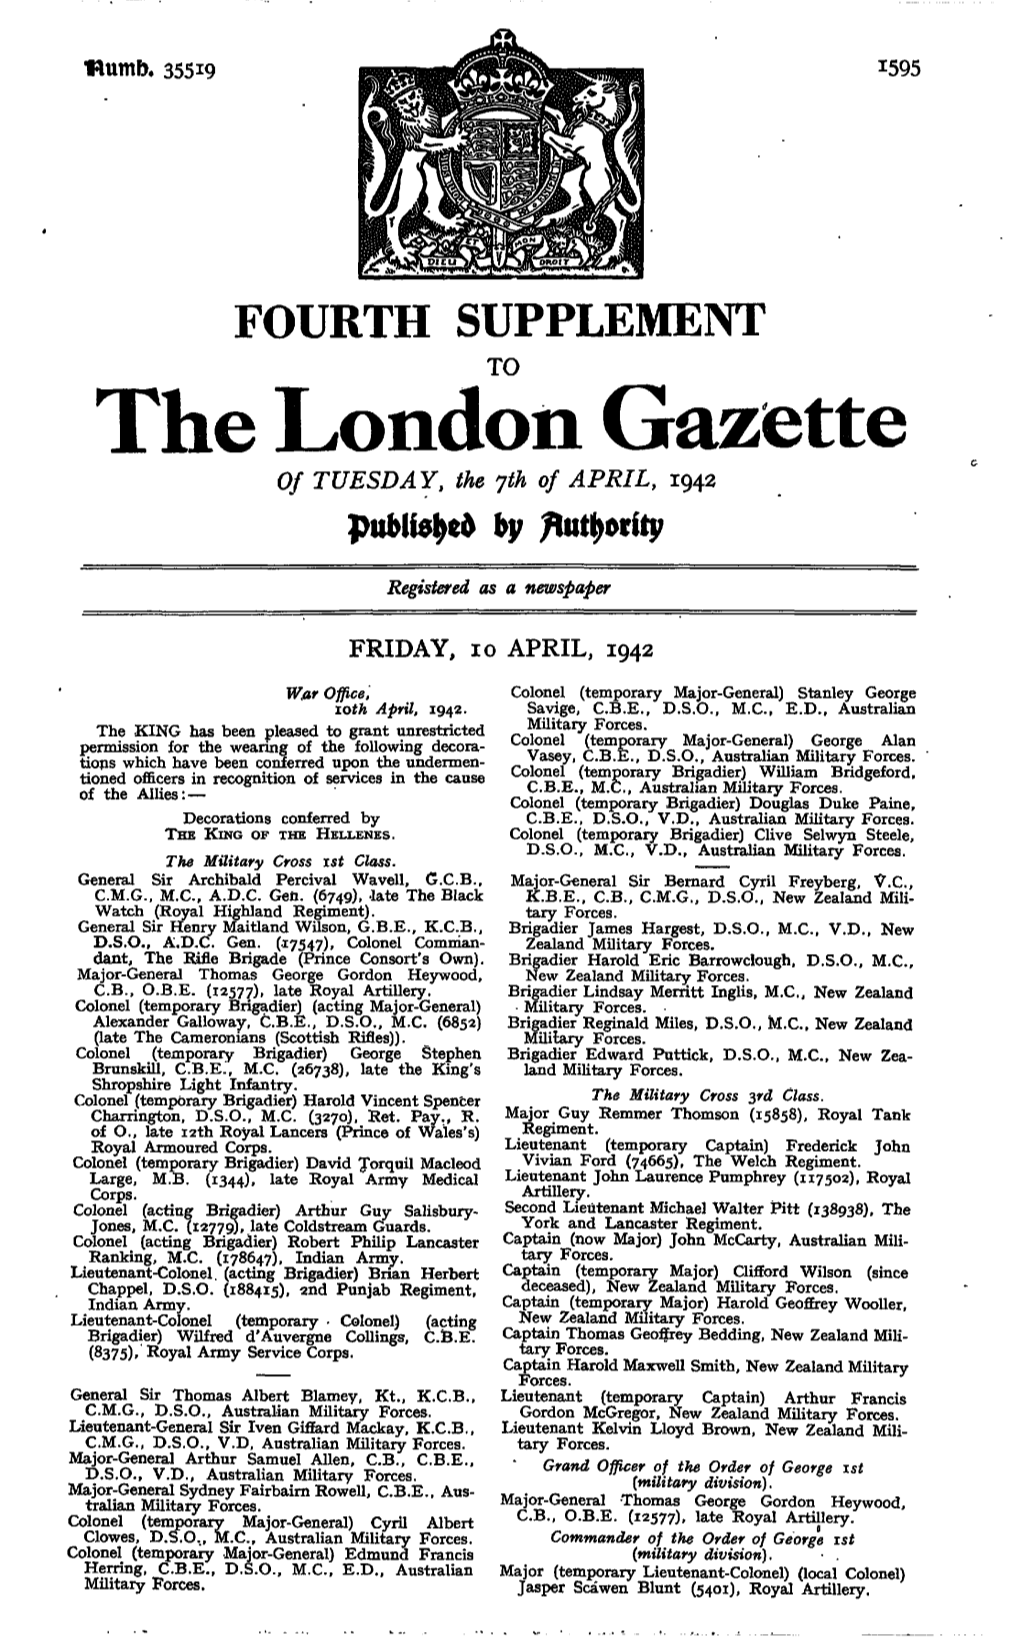 The London Gazette of TUESDAY, the Jth of APRIL, 1942 By